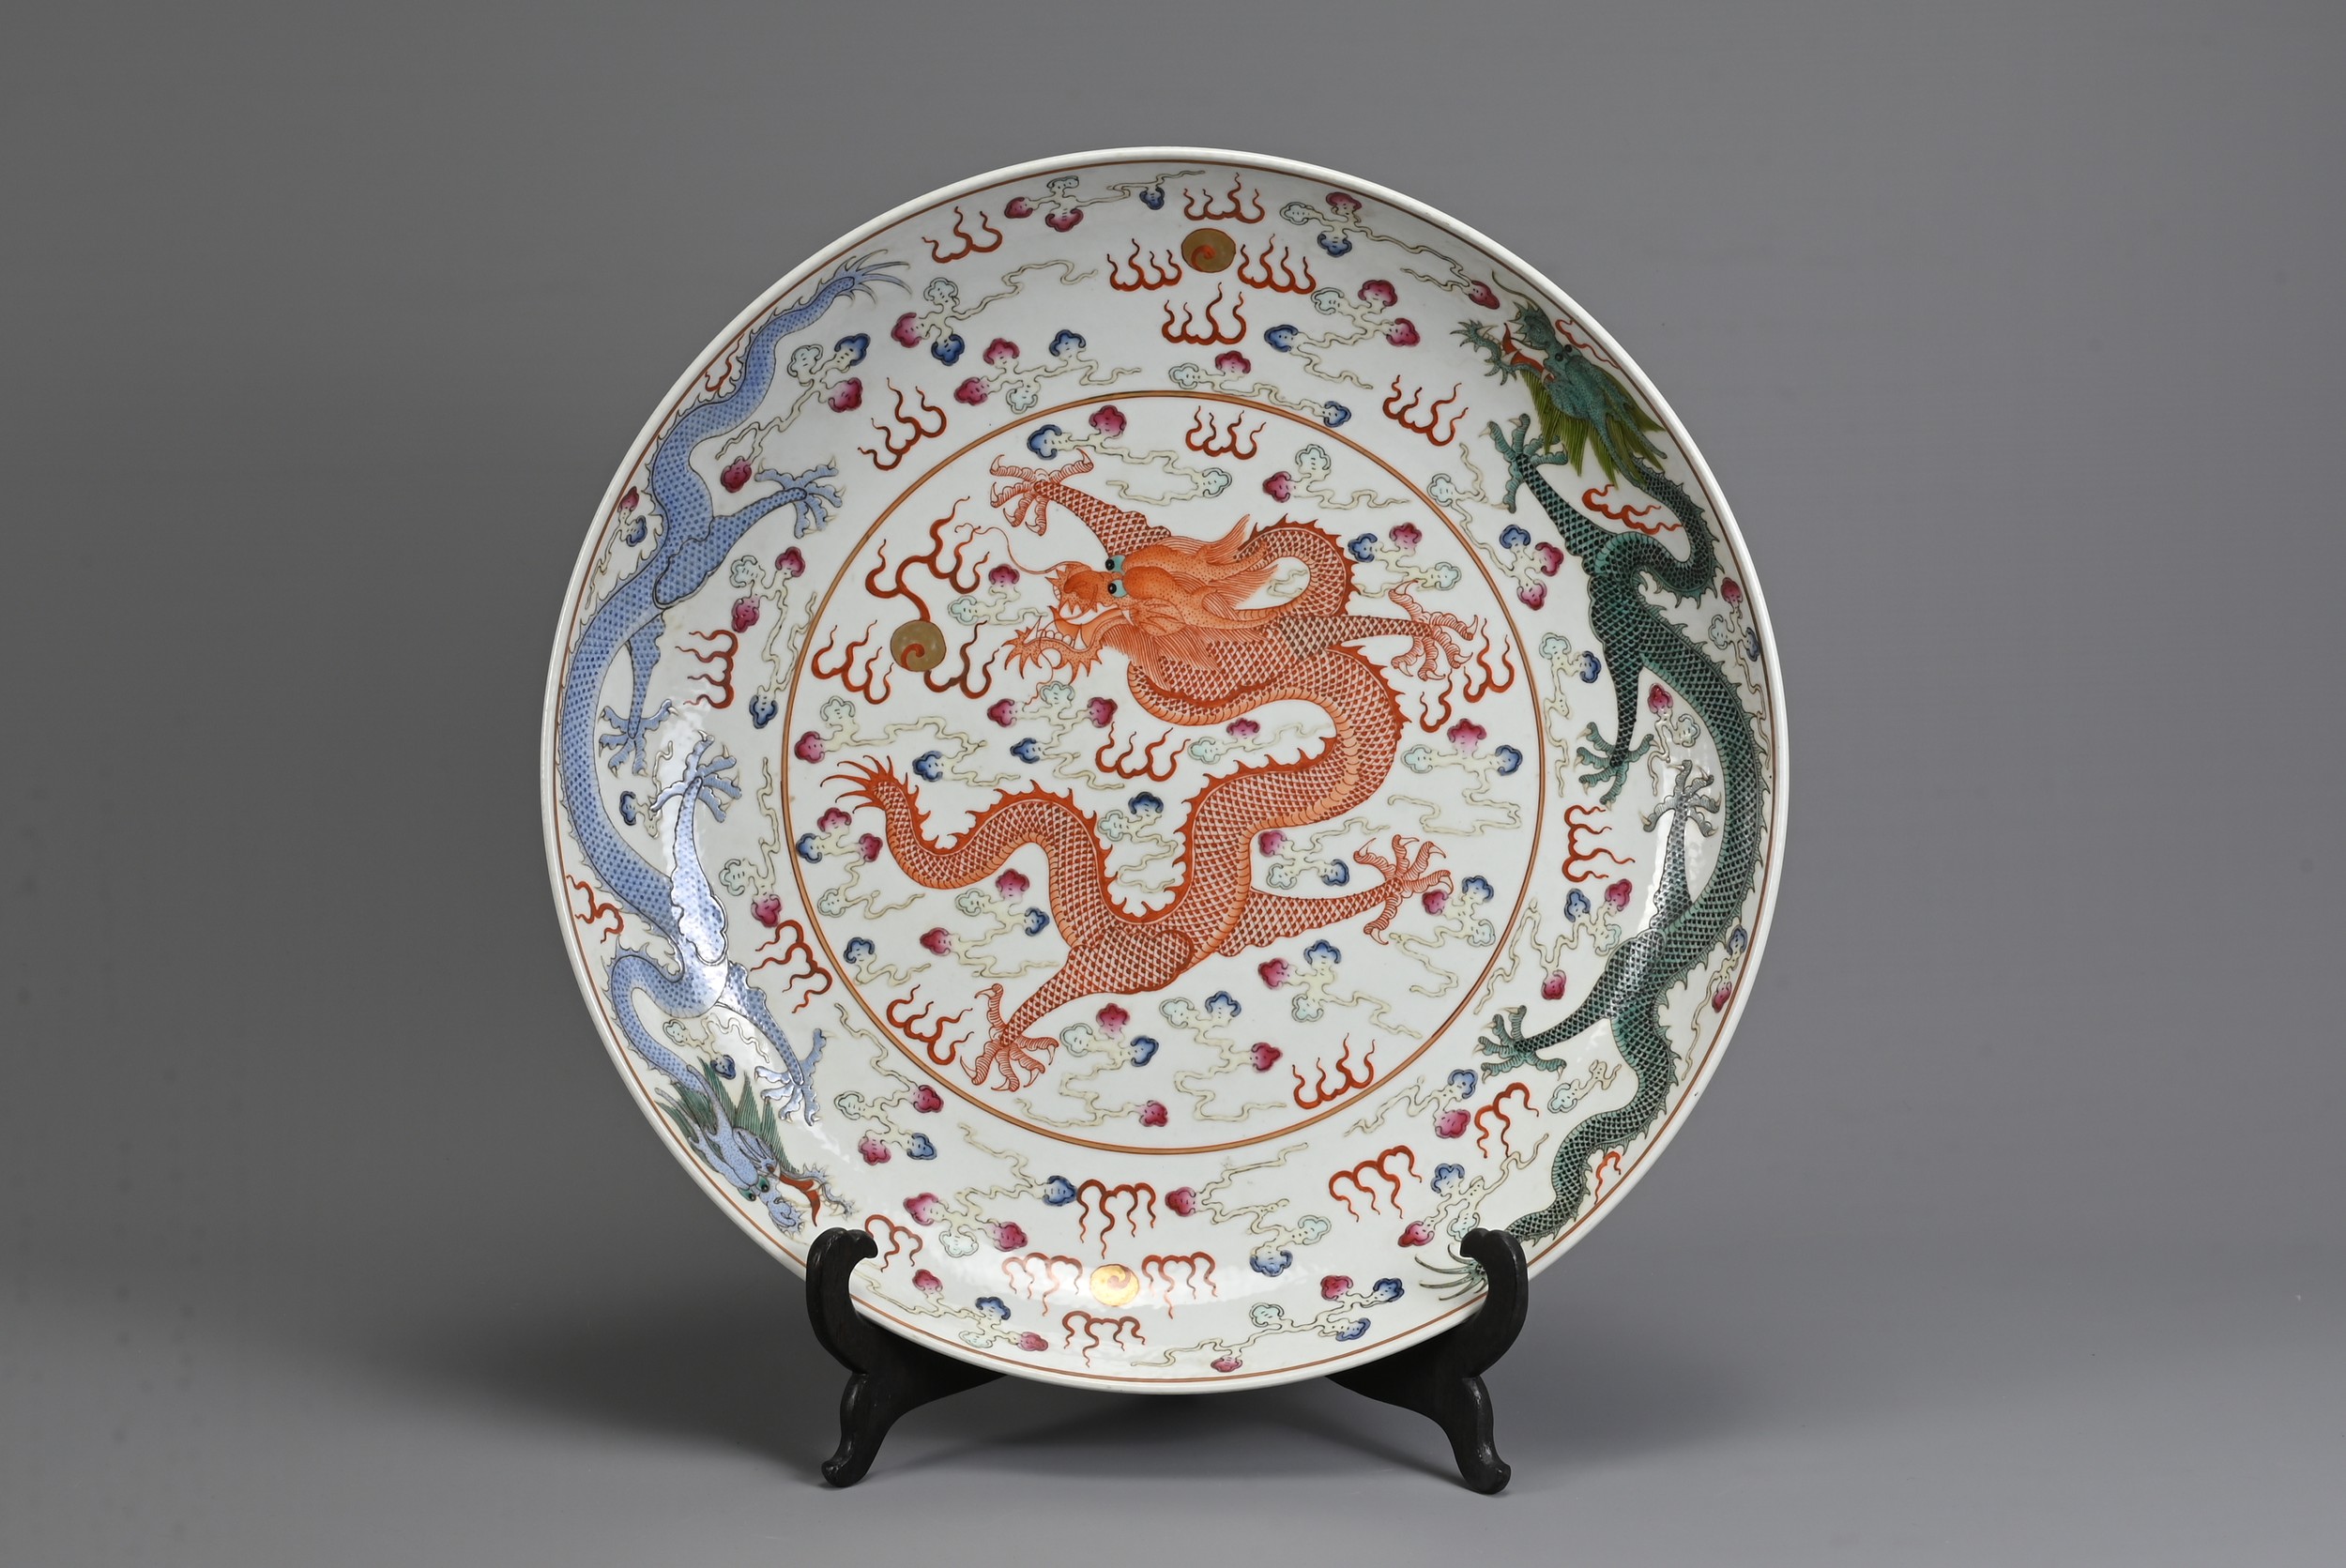 A LARGE CHINESE FAMILLE ROSE PORCELAIN DRAGON DISH, 19/20TH CENTURY. With deep rounded sides